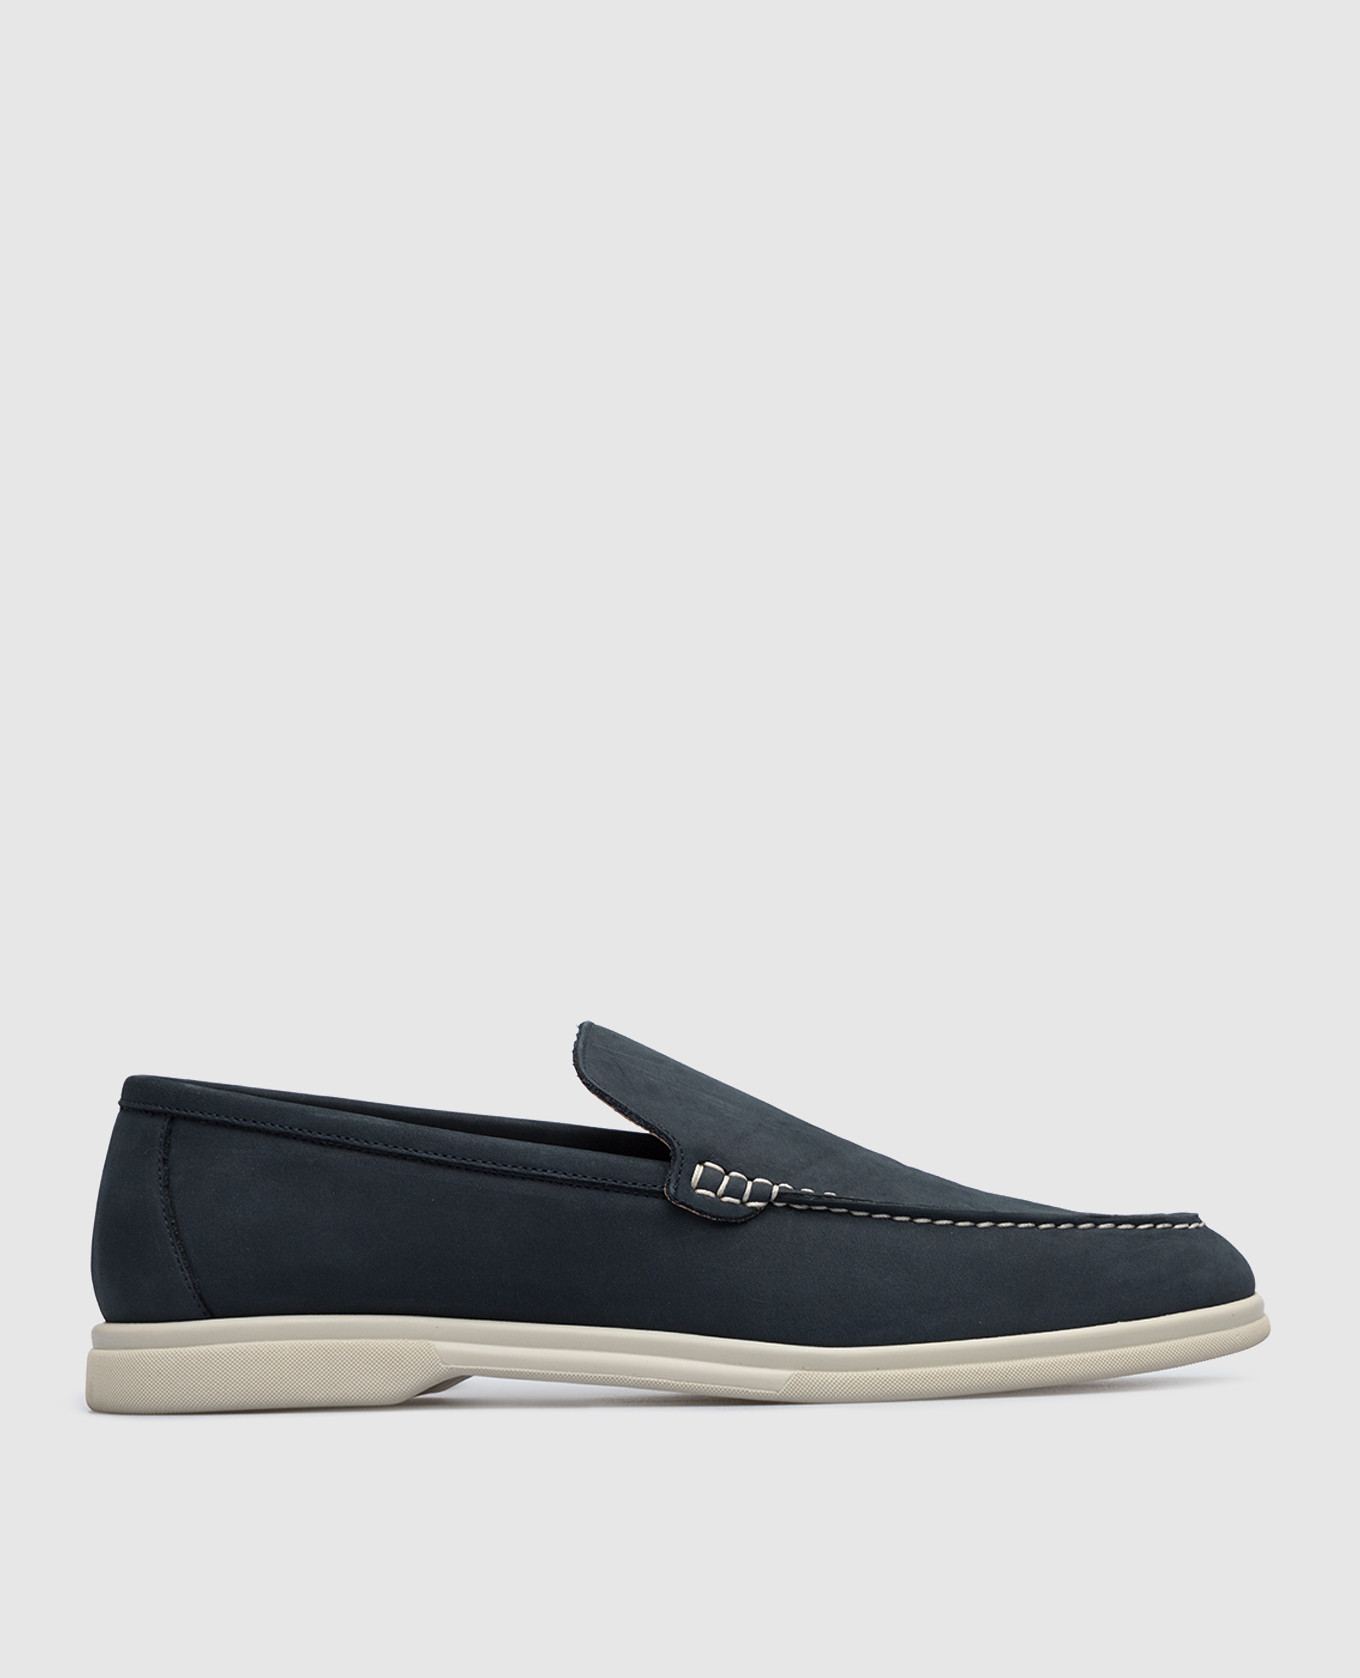 Suede navy blue slippers